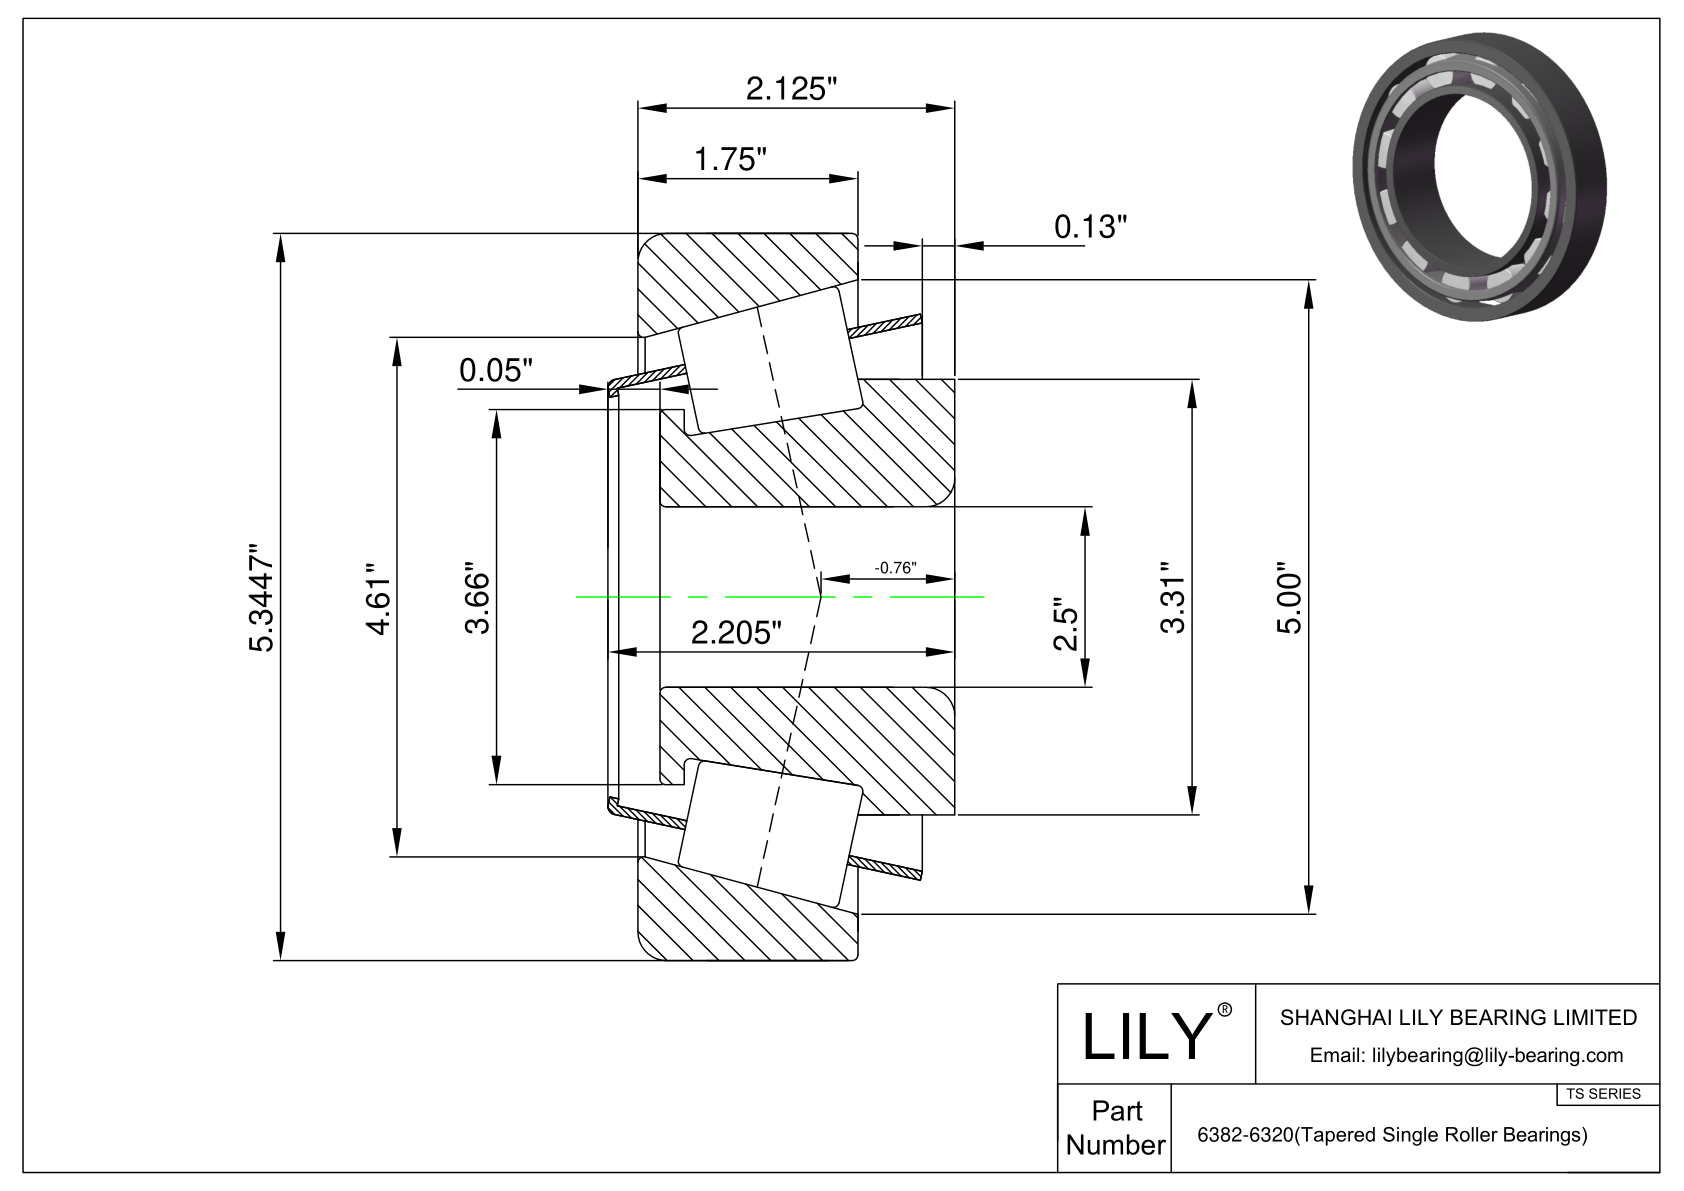 6382-6320 TS (Tapered Single Roller Bearings) (Imperial) cad drawing